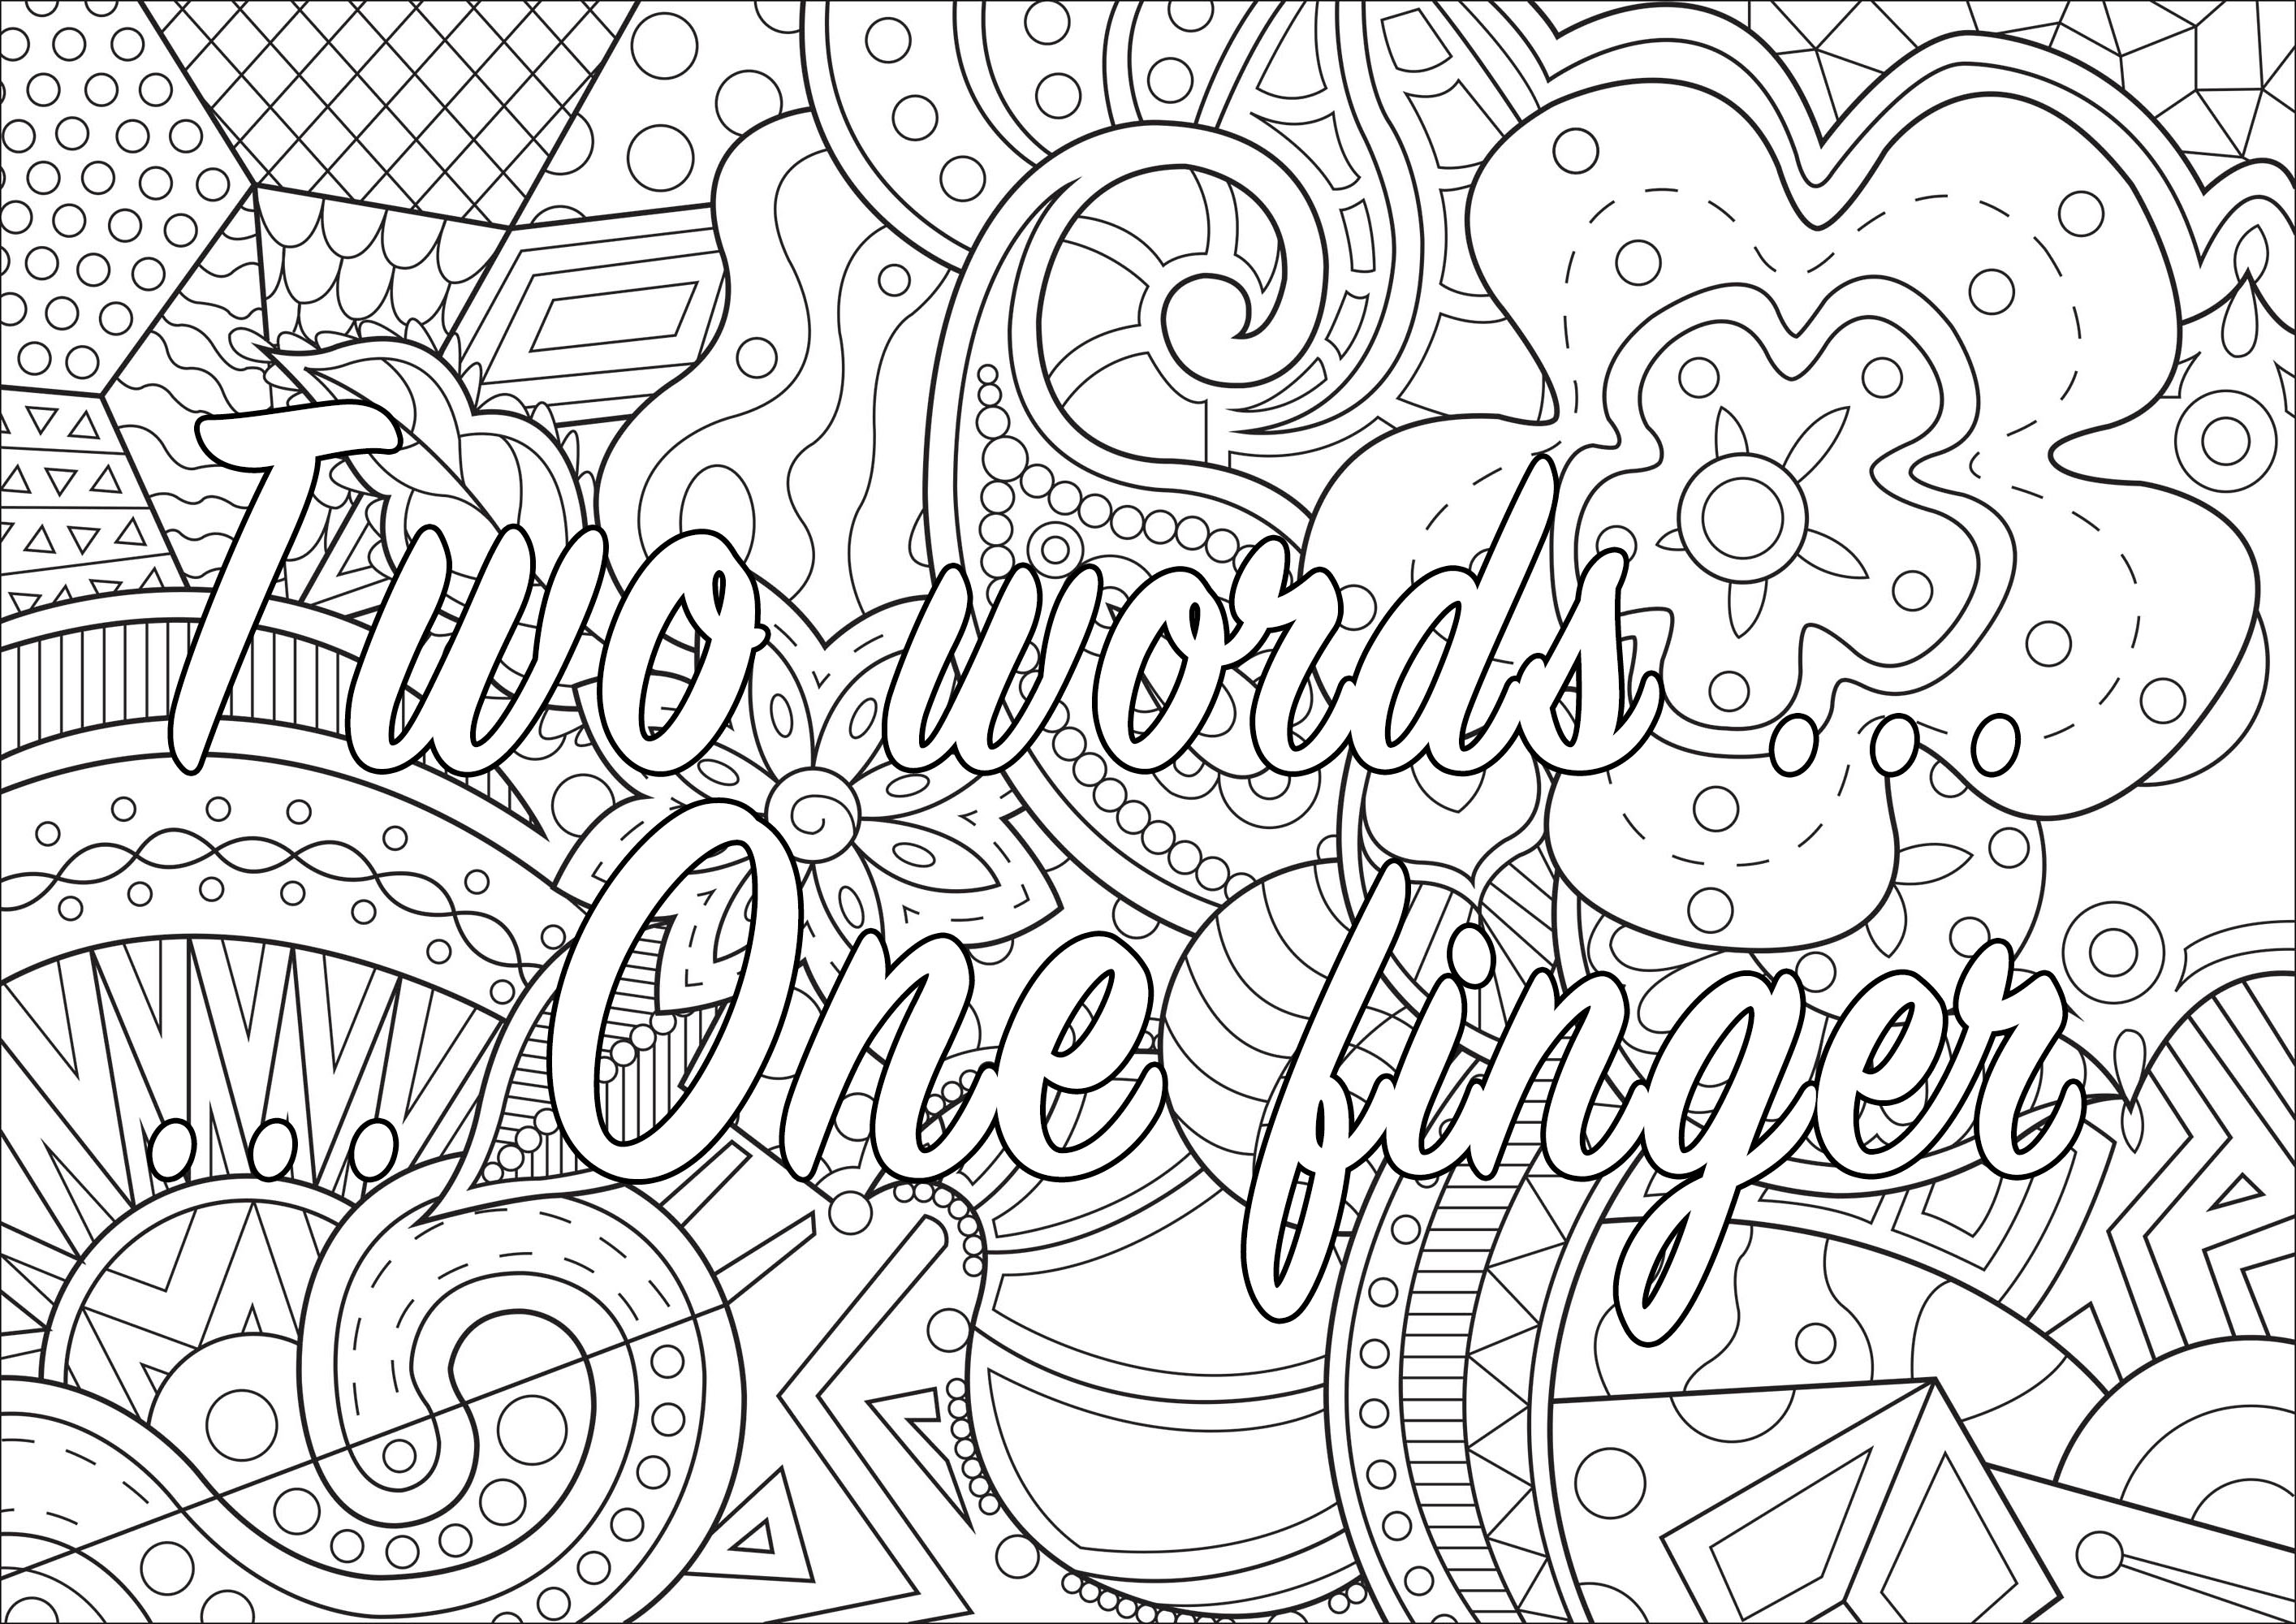 Two Words One Finger Swear Word Coloring Page Swear Word Adult Coloring Pages